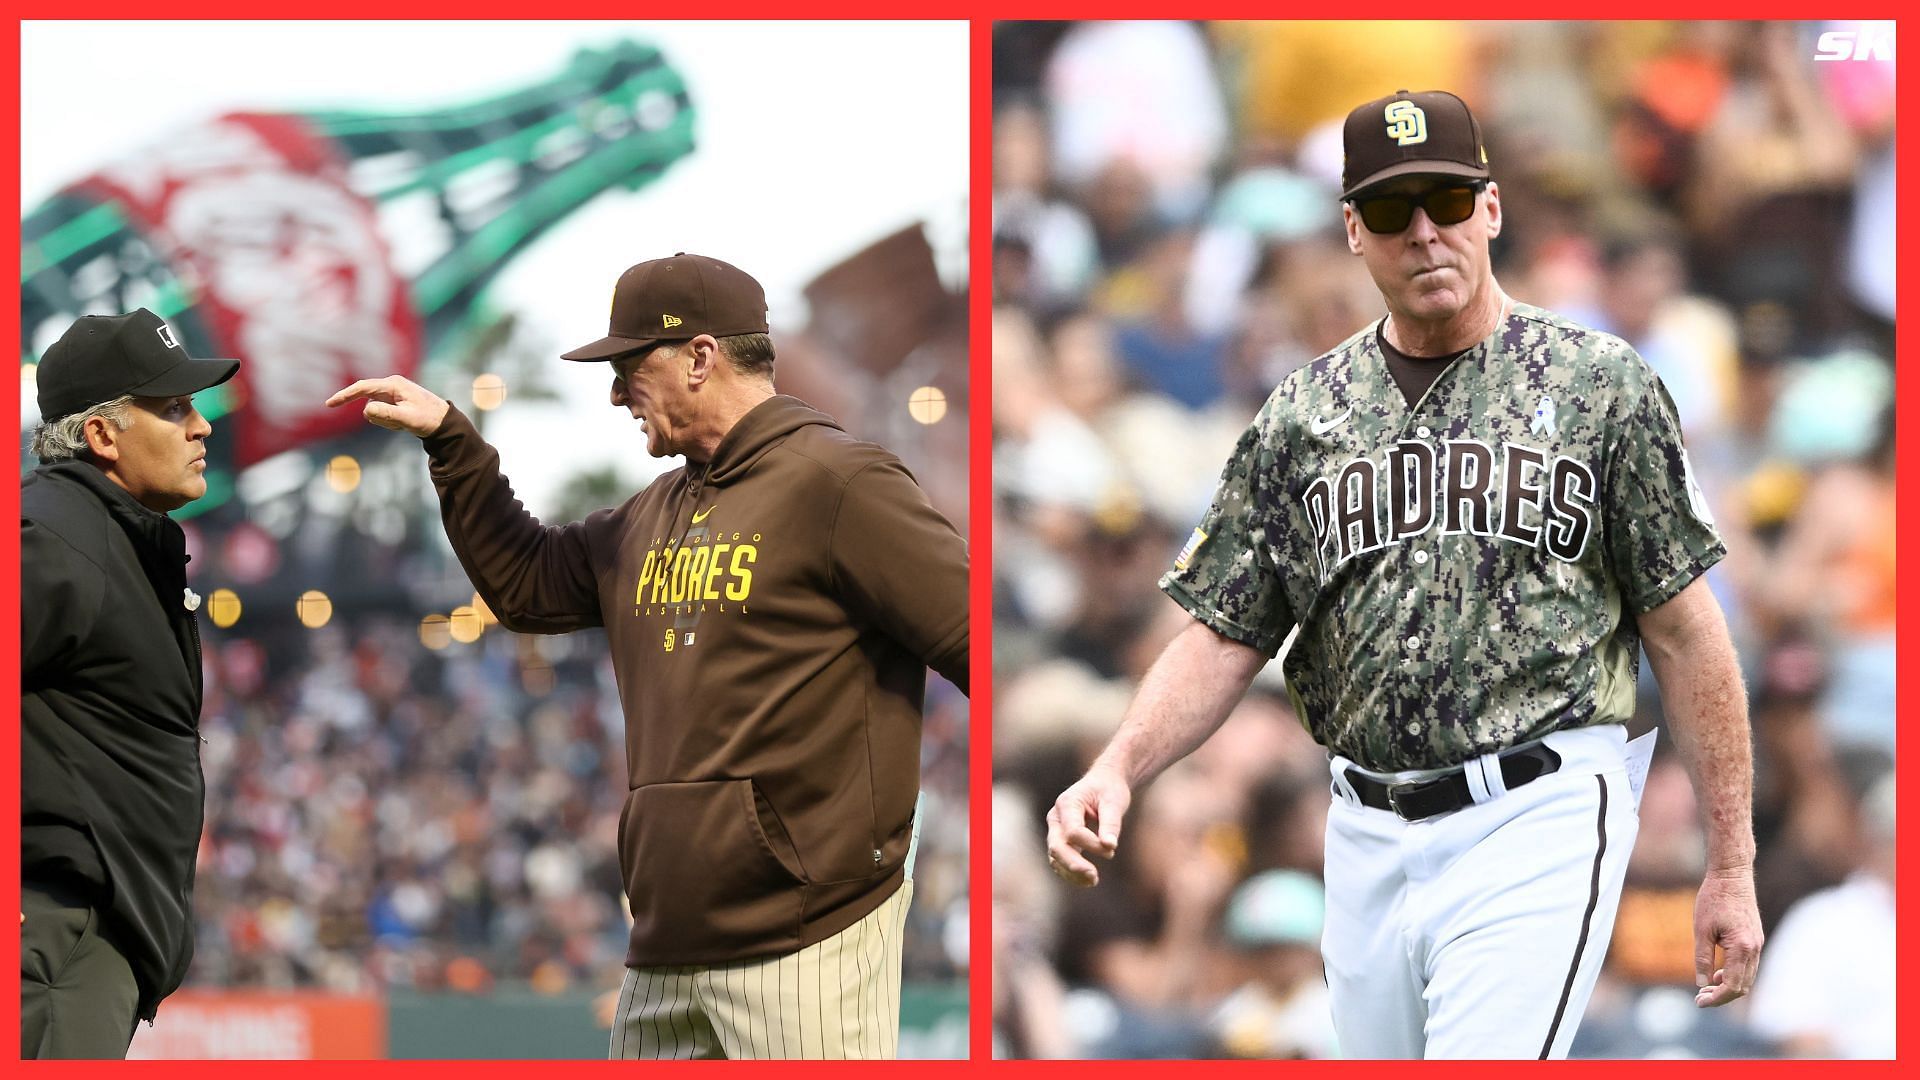 Padres: Bob Melvin's job appears to be safe